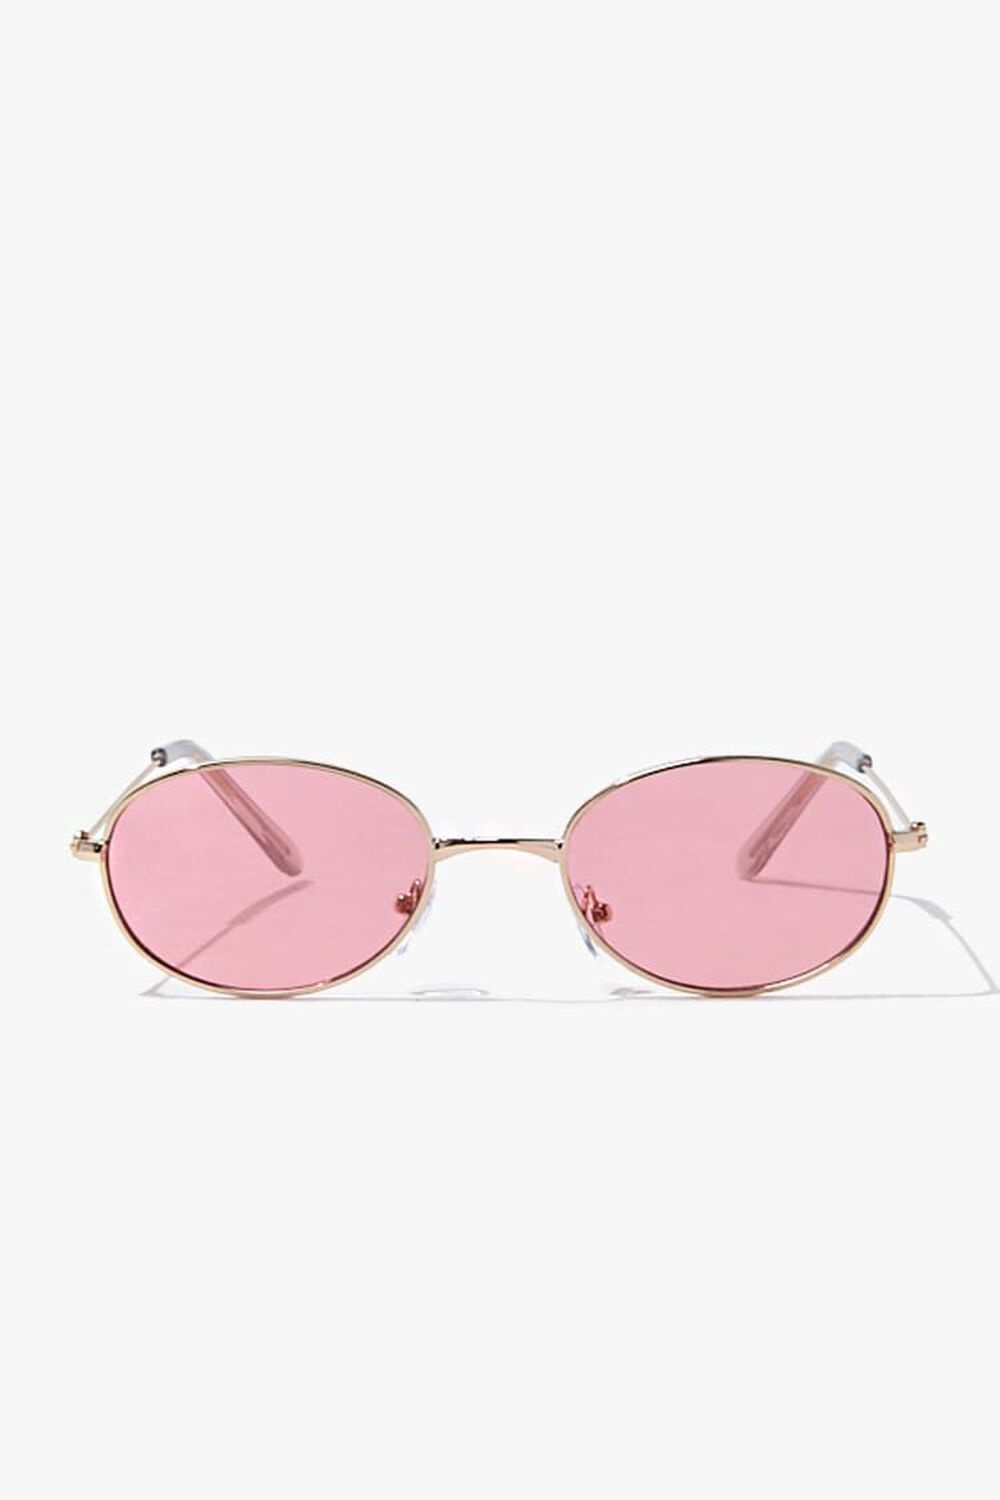 GOLD/PINK Oval Tinted Sunglasses, image 1